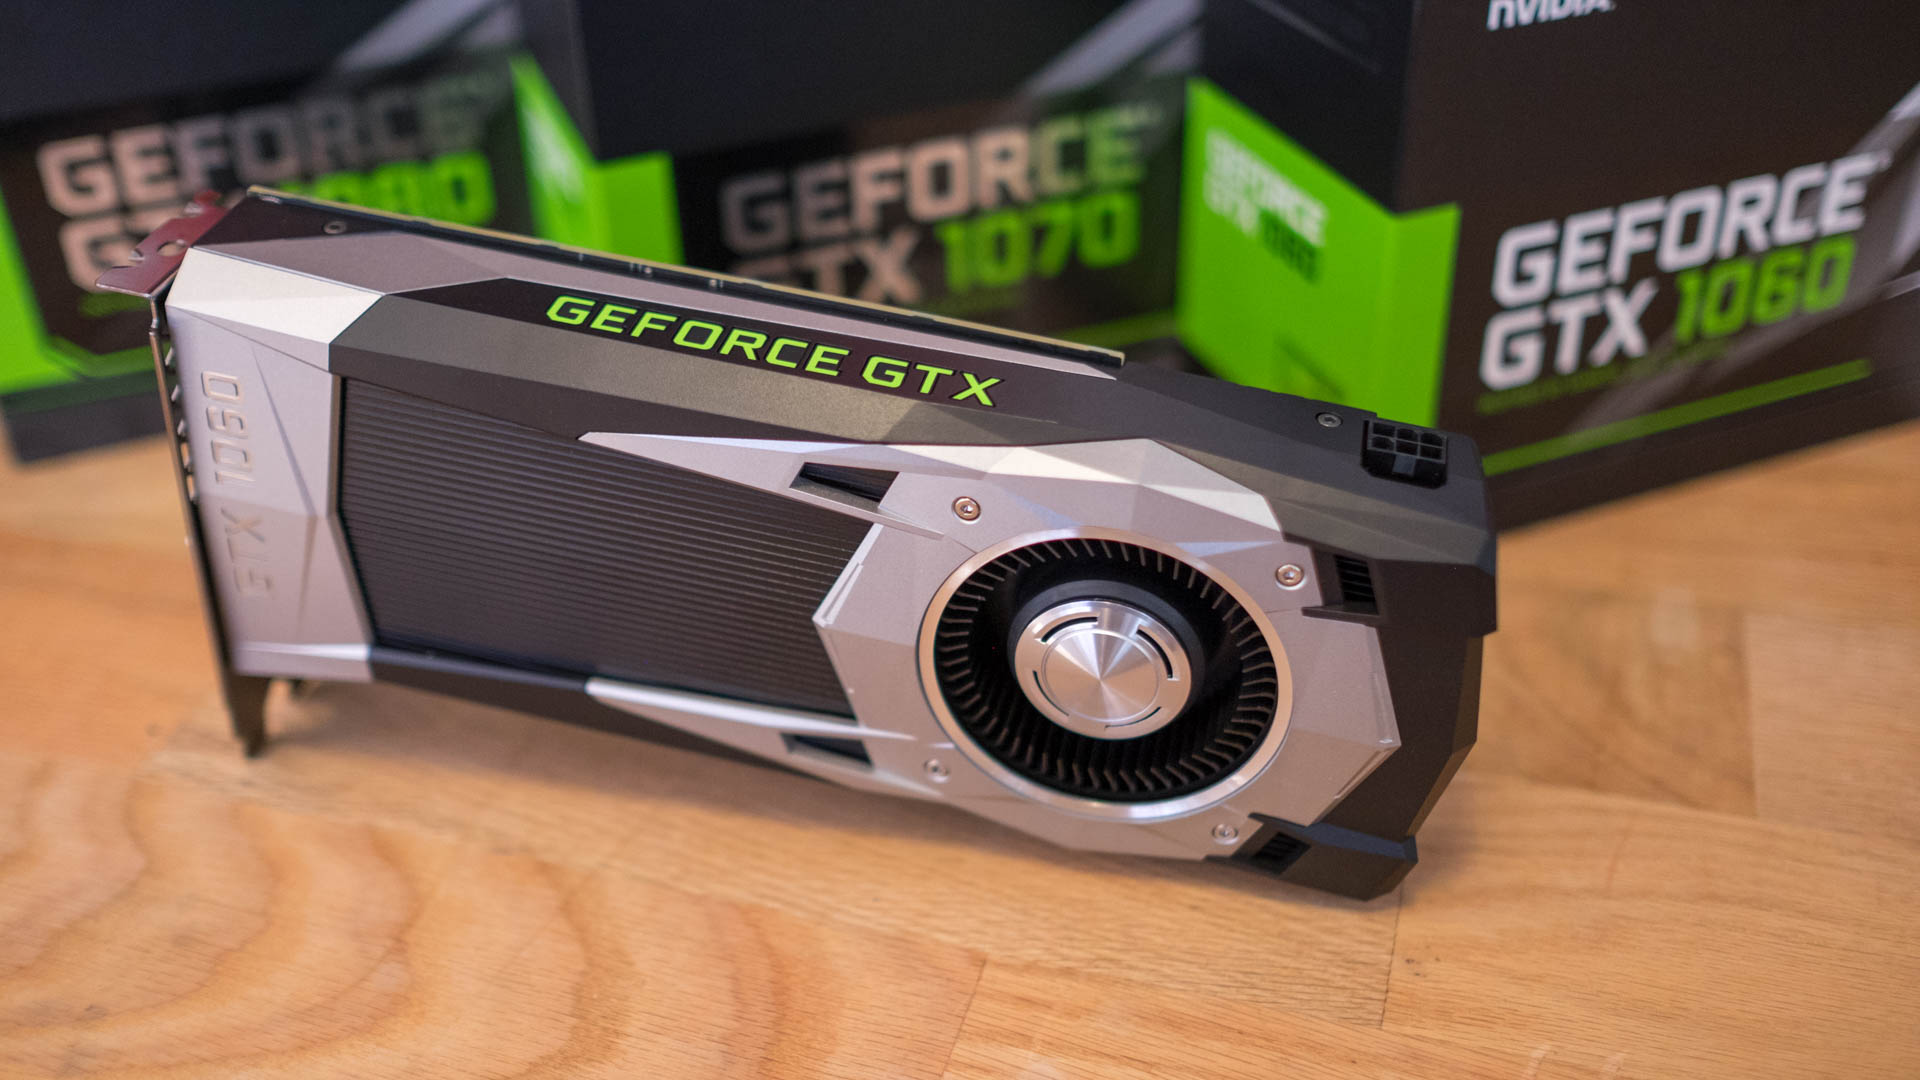 Nvidia boosts GTX 1060 with 6GB of 